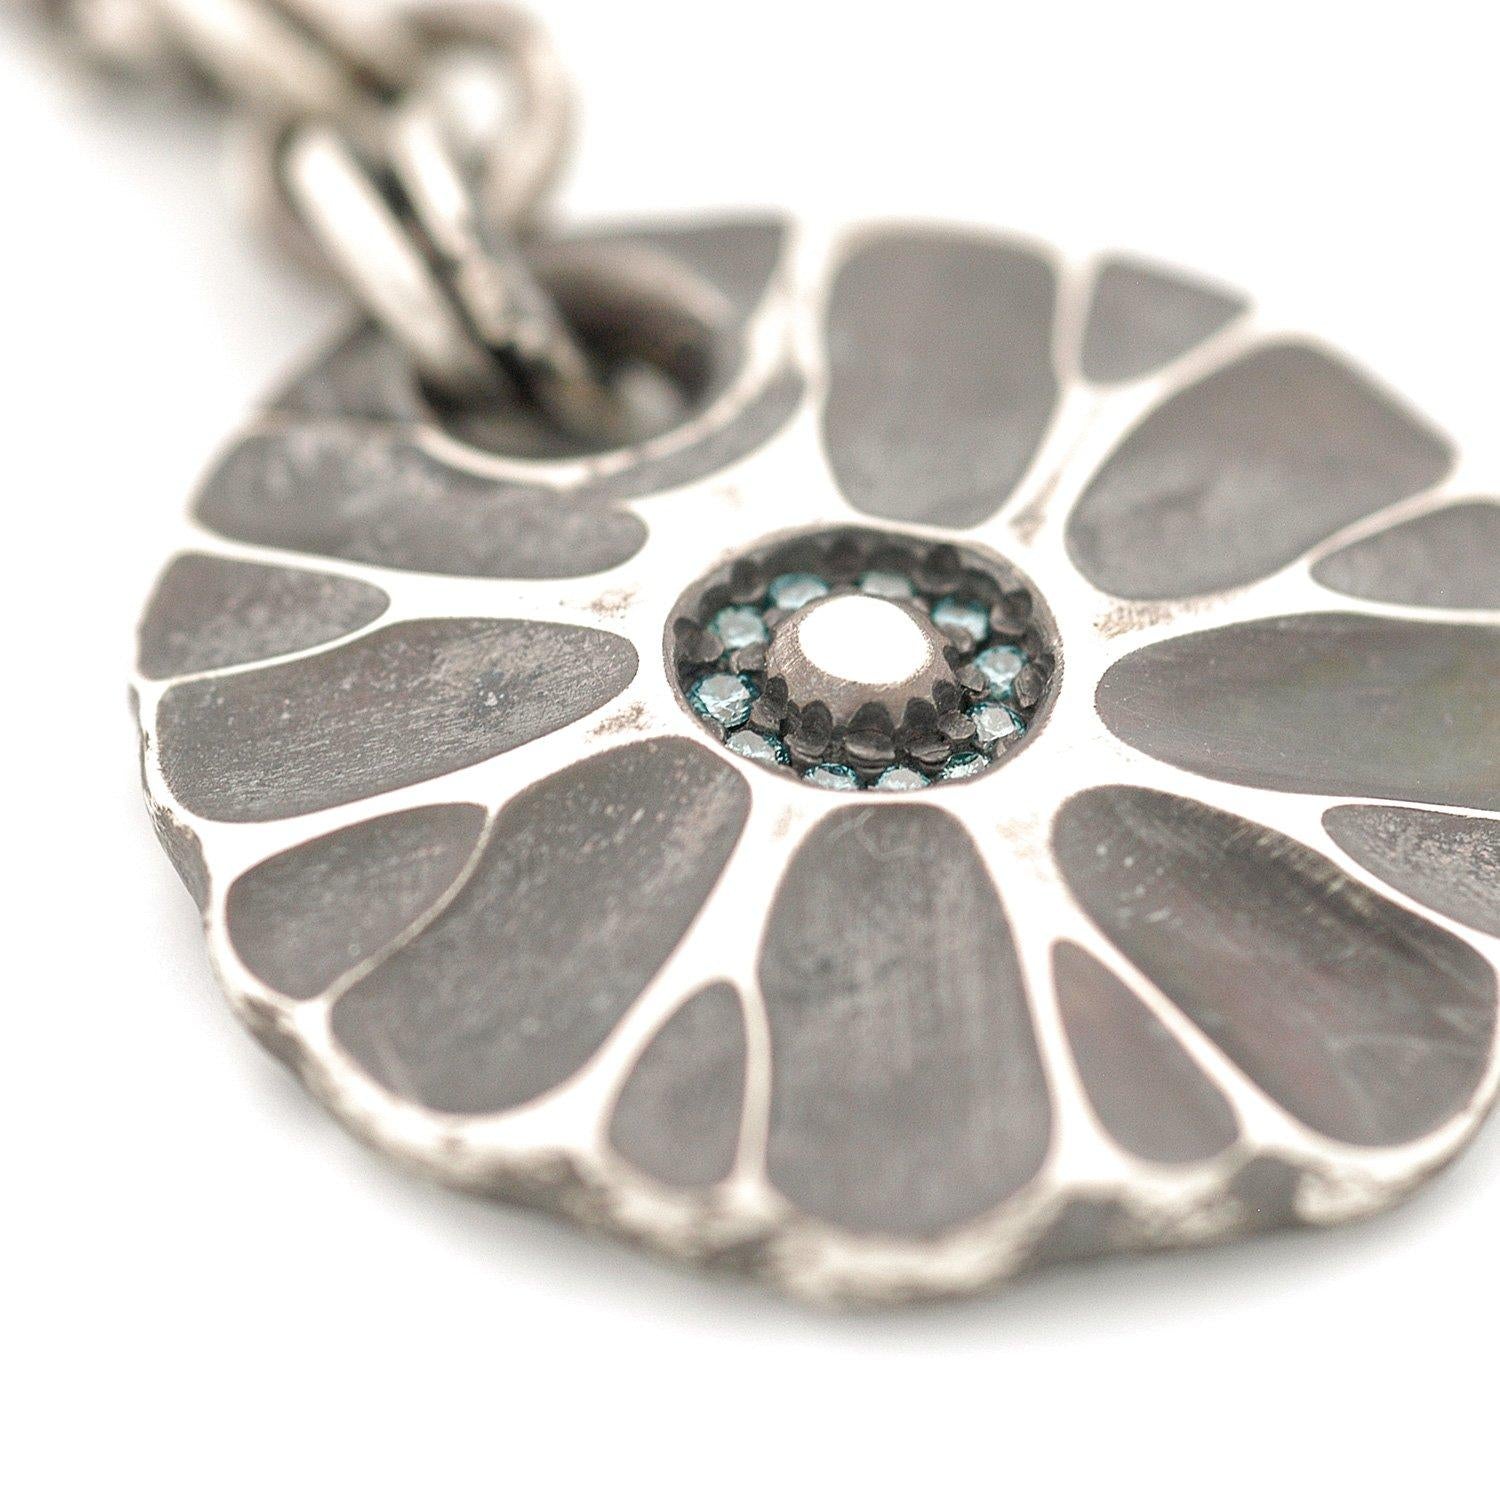 Sterling Silver Flower Drop with Blue Diamonds